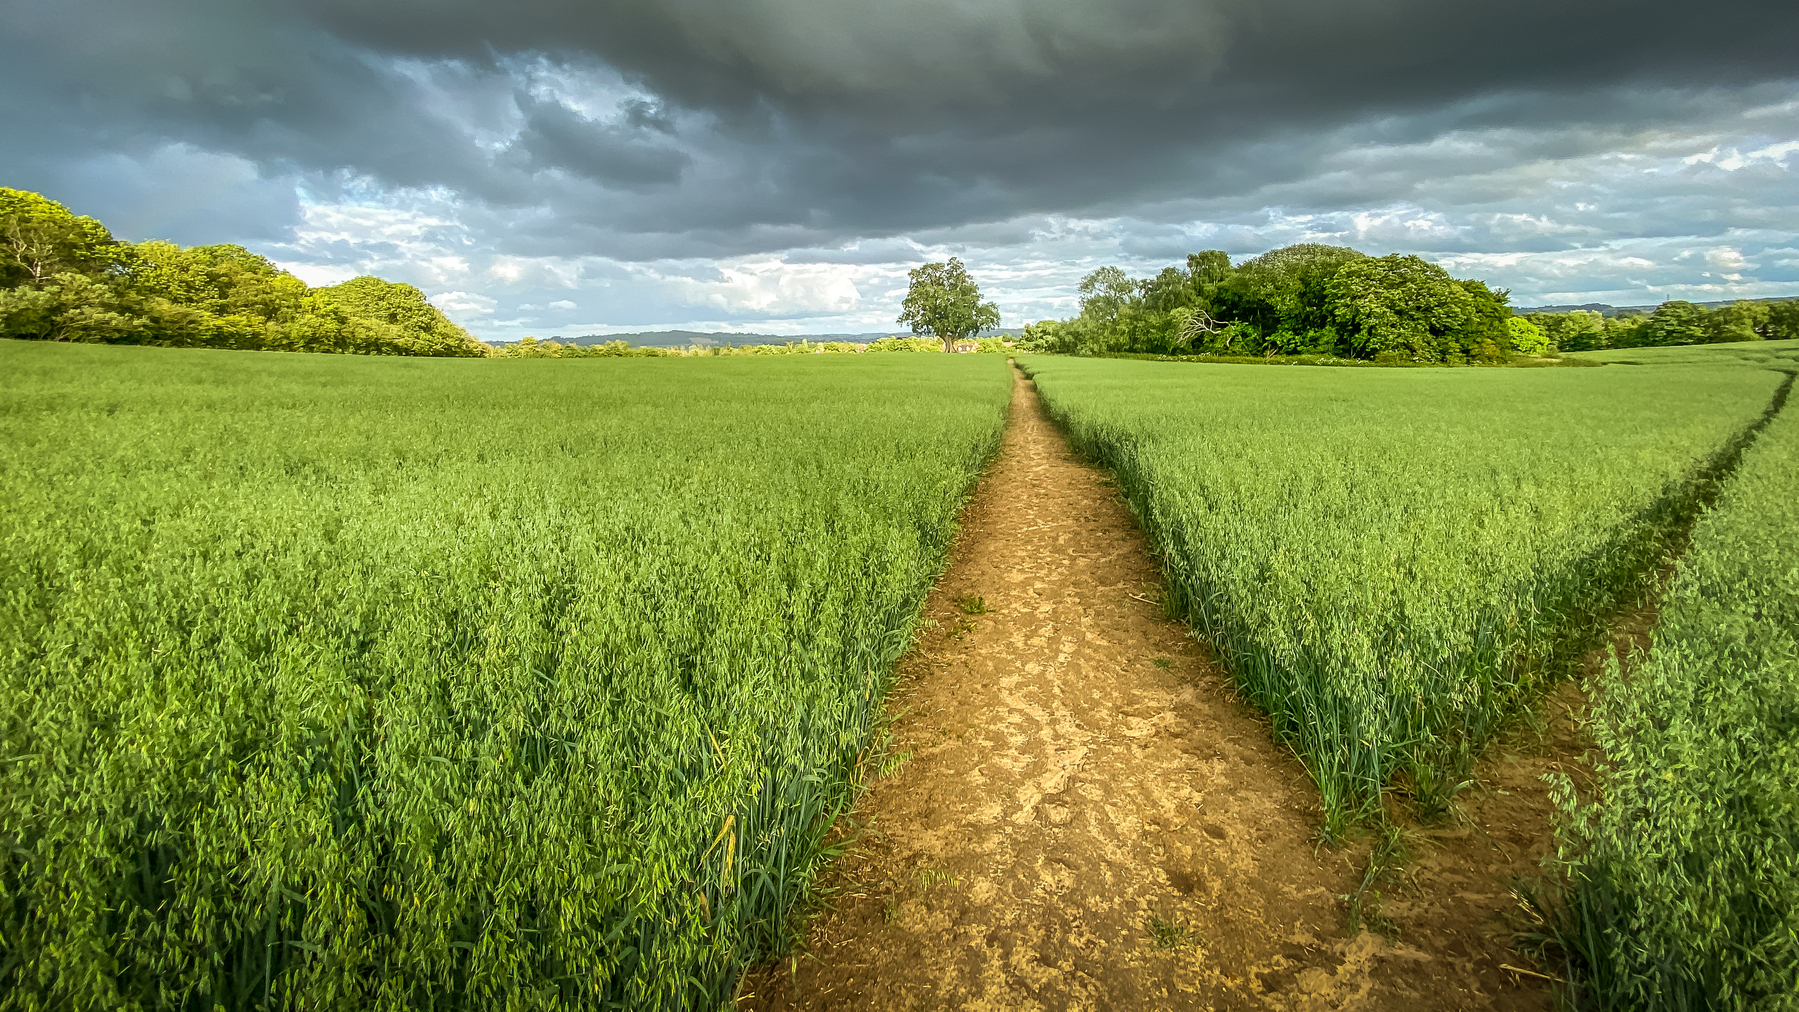 photo of a path in a field leading to sutton benger, a large village in wiltshire, uk